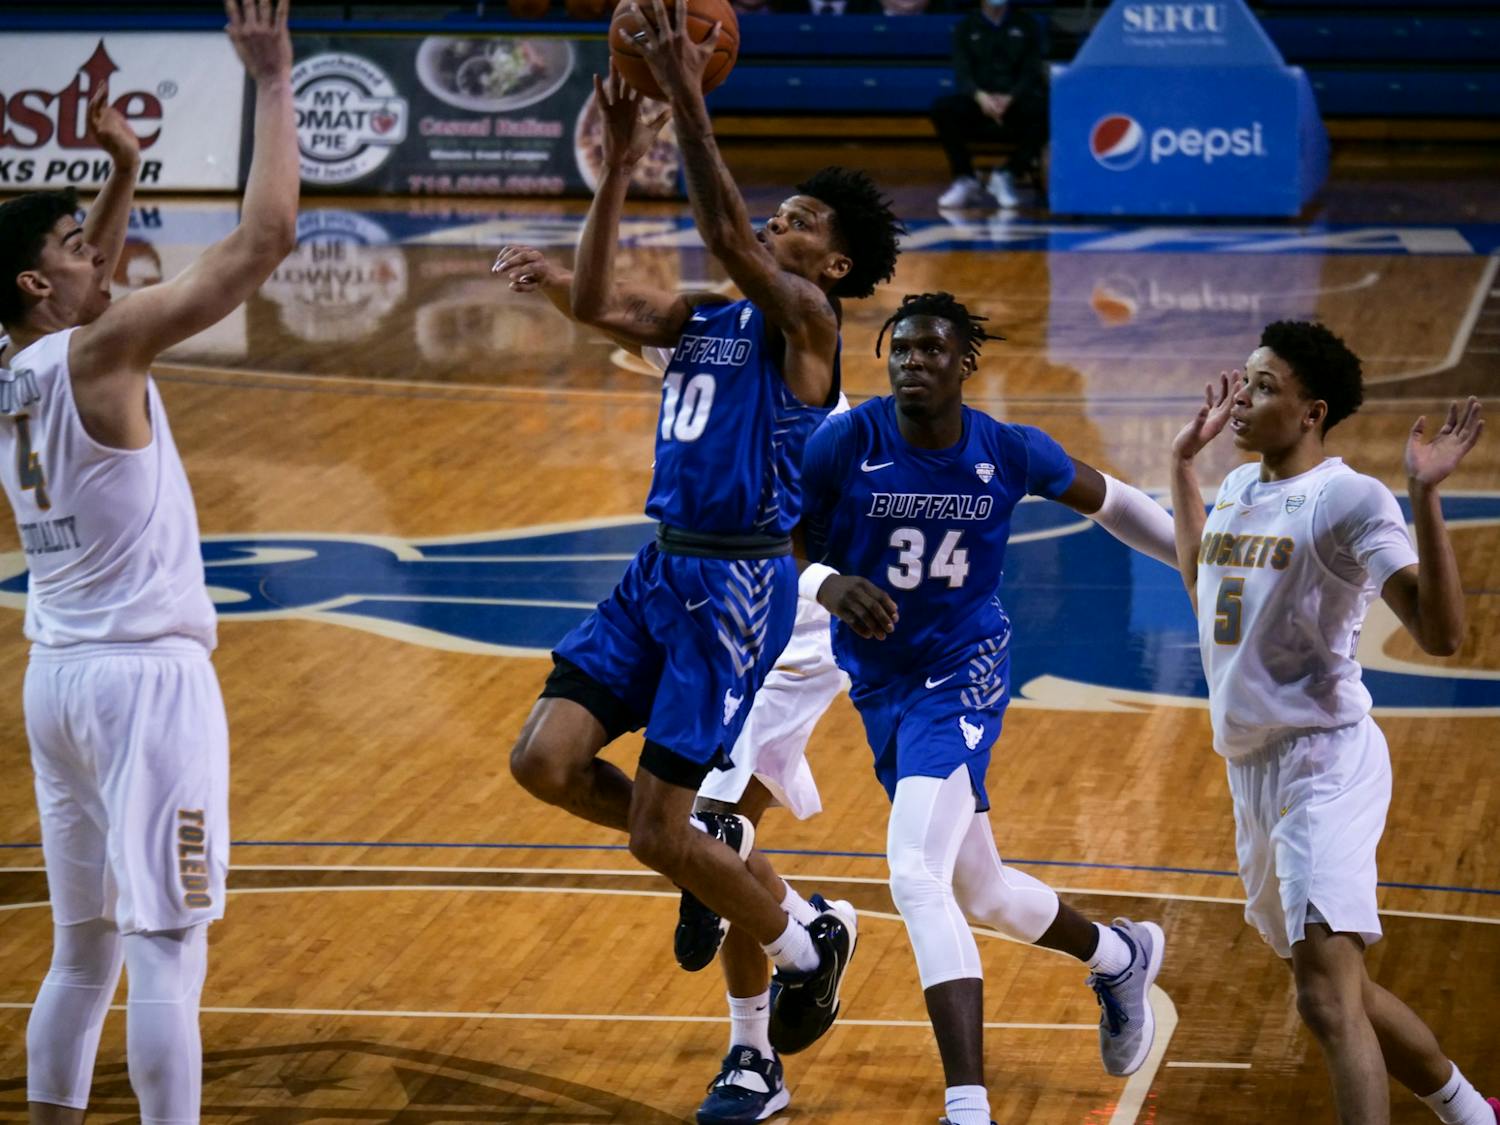 Men’s basketball is scheduled to face the Colorado State Rams in the first round of the National Invitational Tournament at the University of Northern Texas.